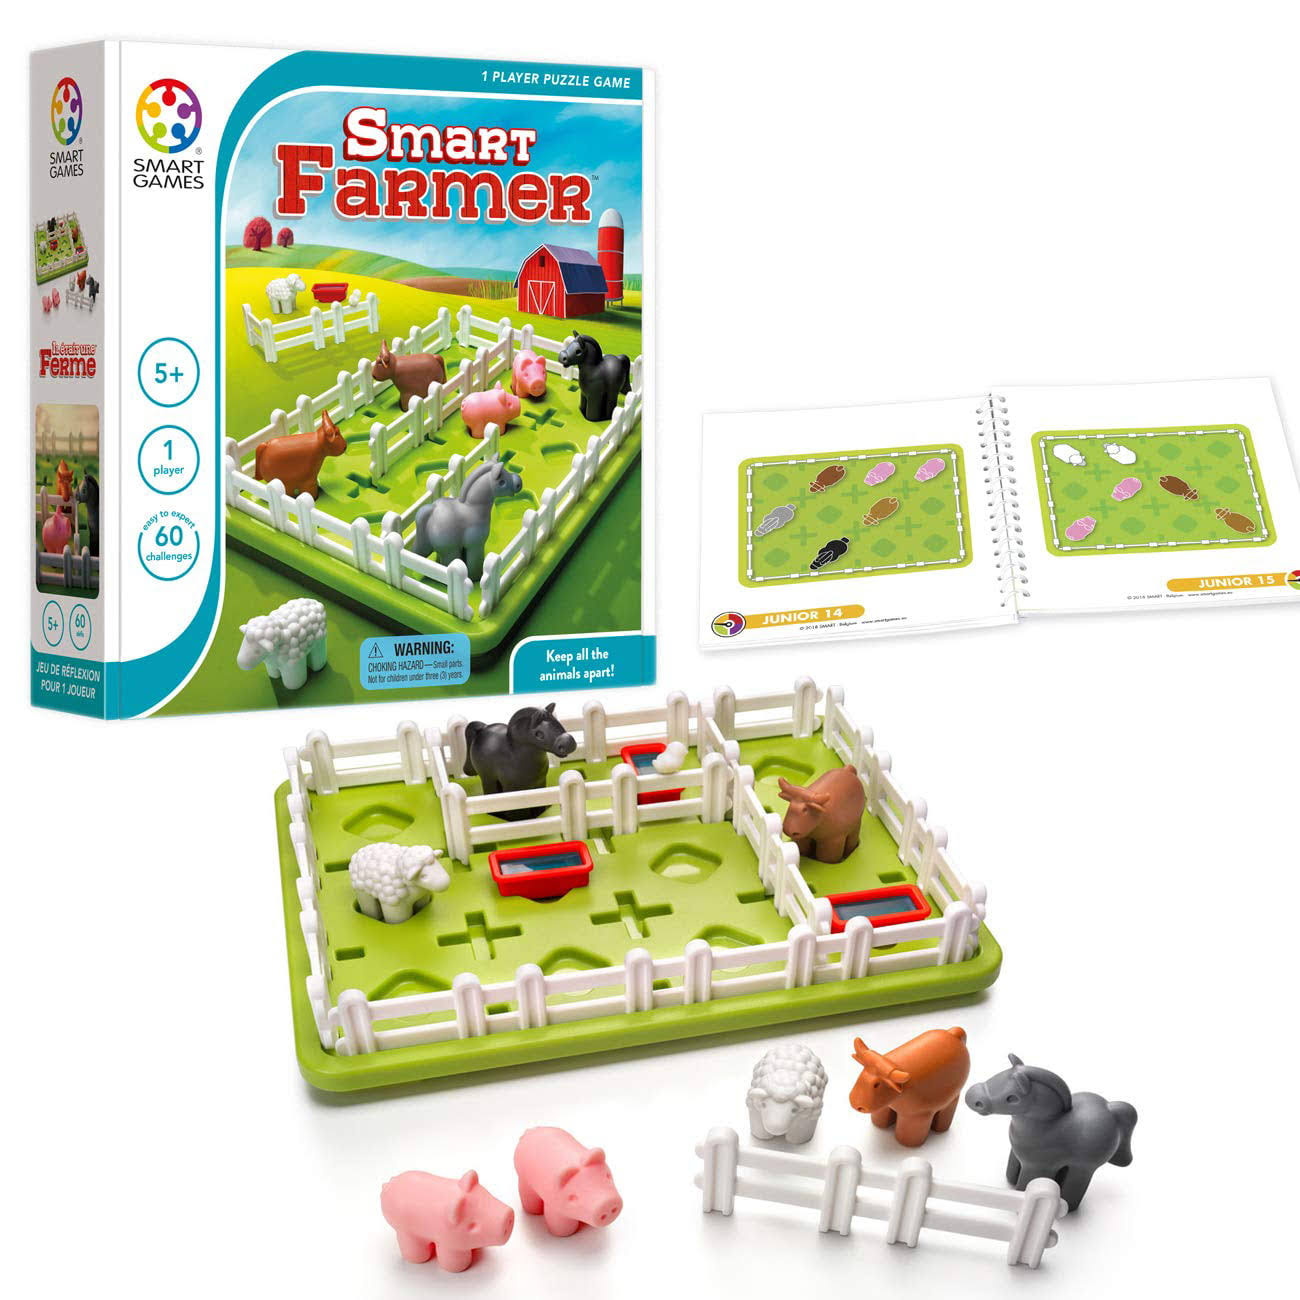 SmartGames Smart Farmer Board Game, A Fun, STEM Focused Cognitive Skill-Building Brain Game And Puzzle Game For Ages 4 And Up